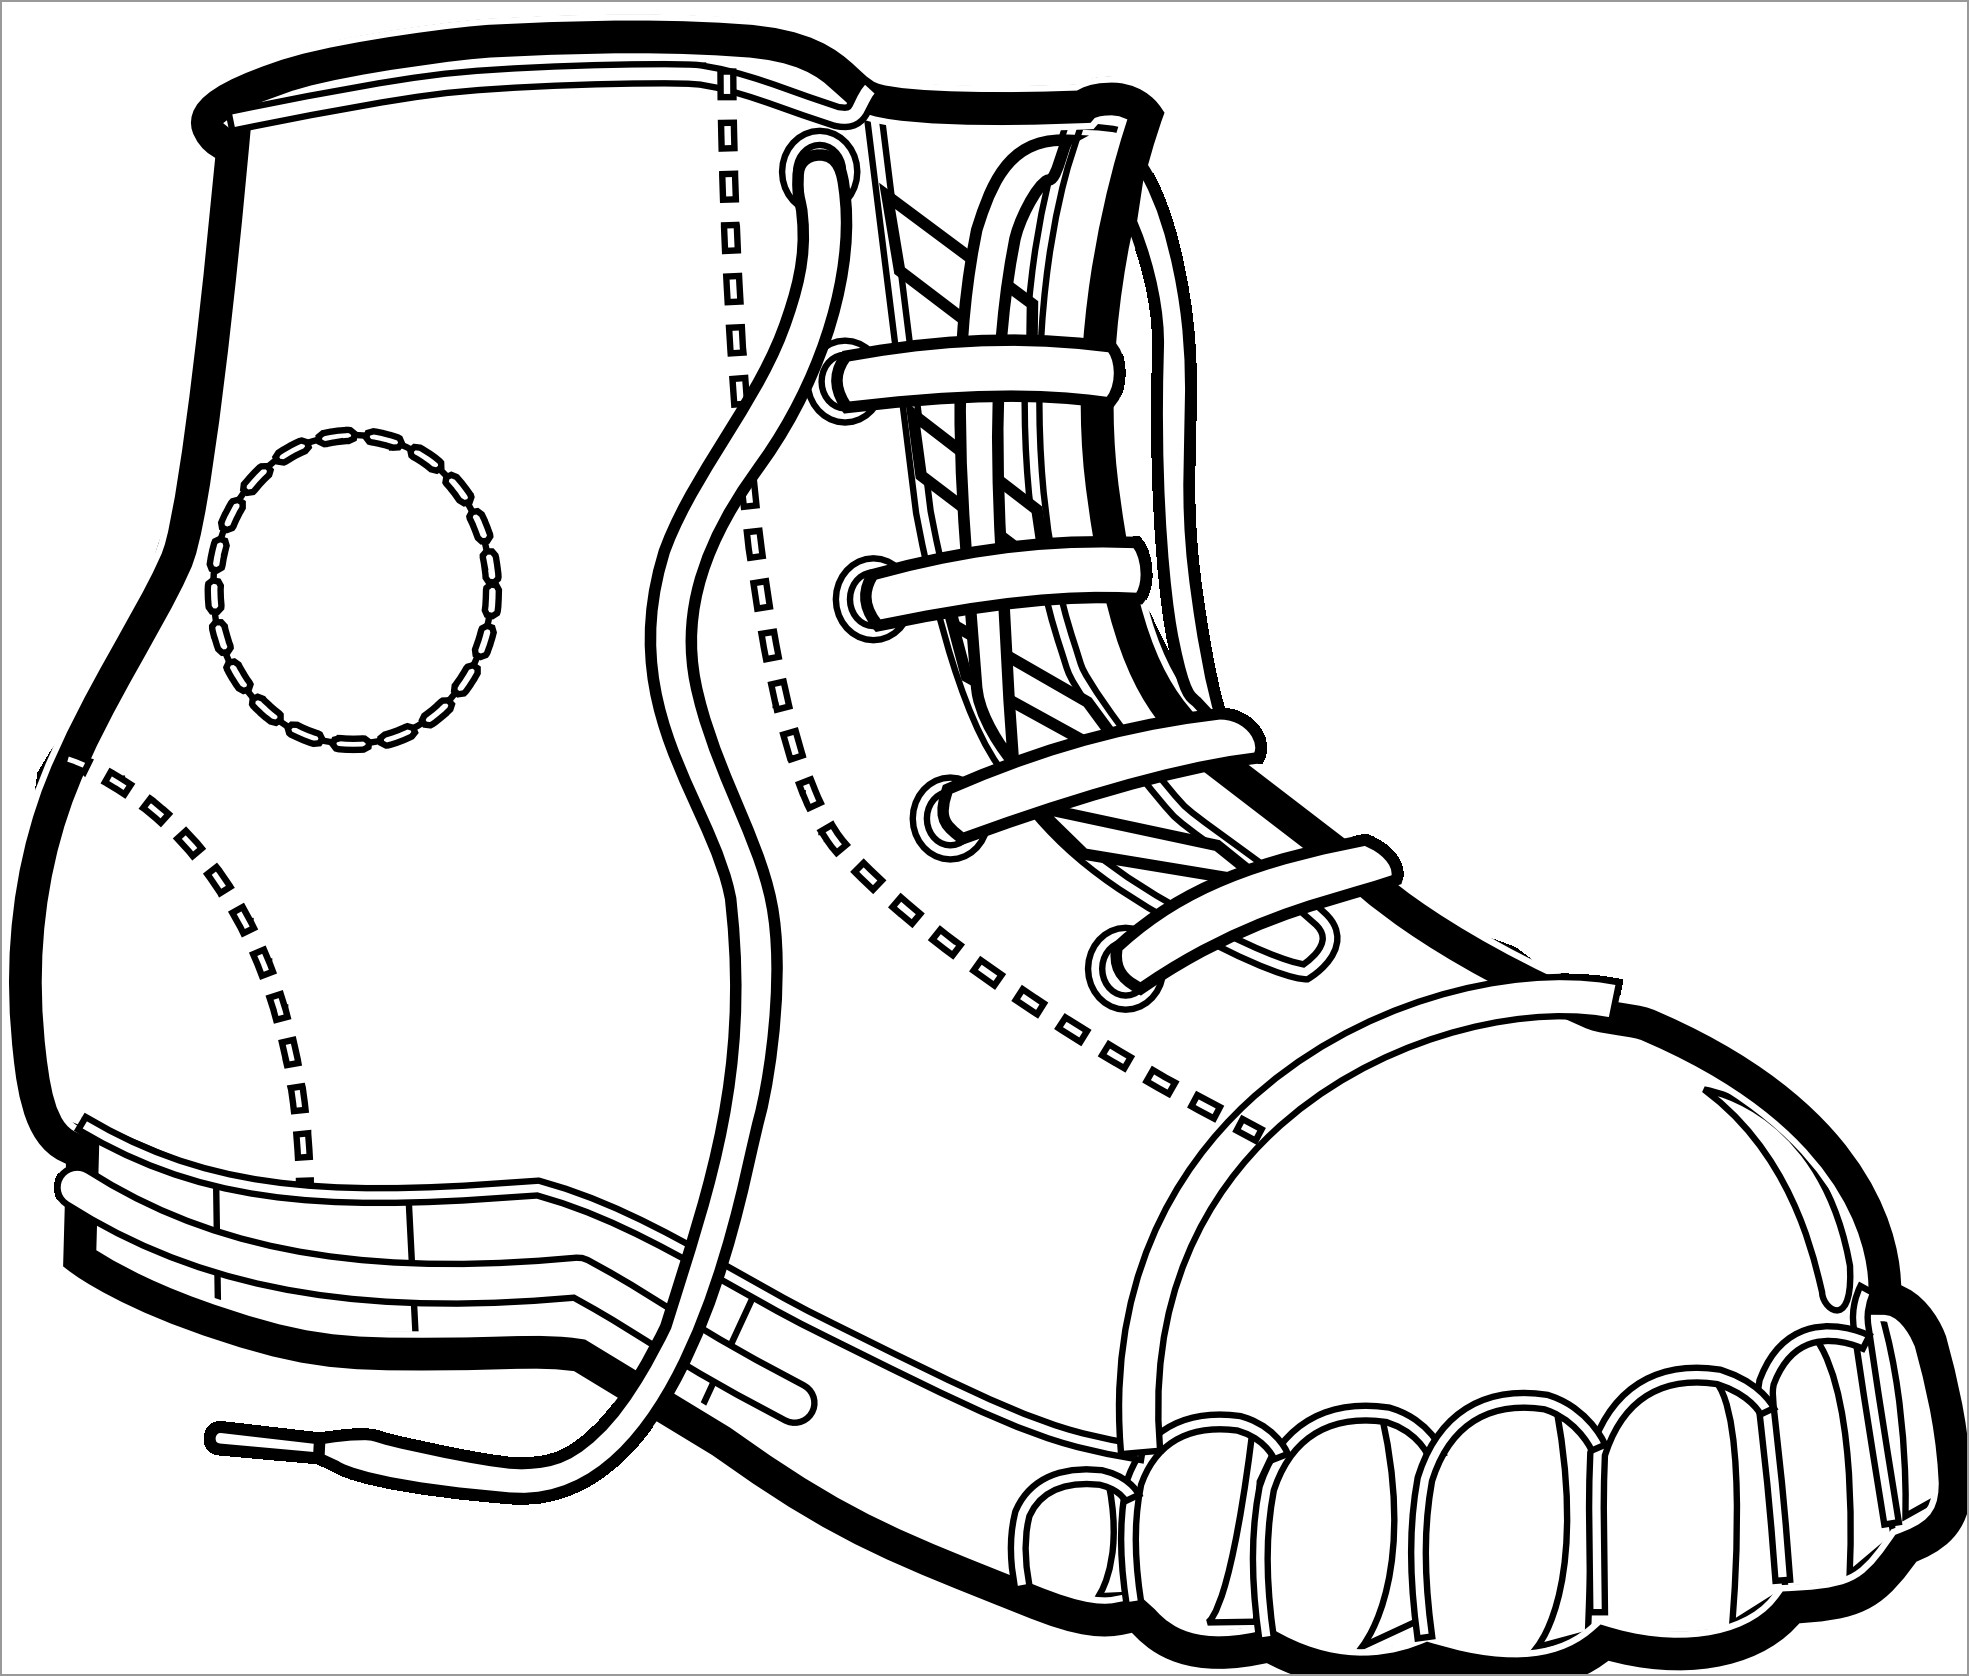 Download Boots Coloring Pages - ColoringBay